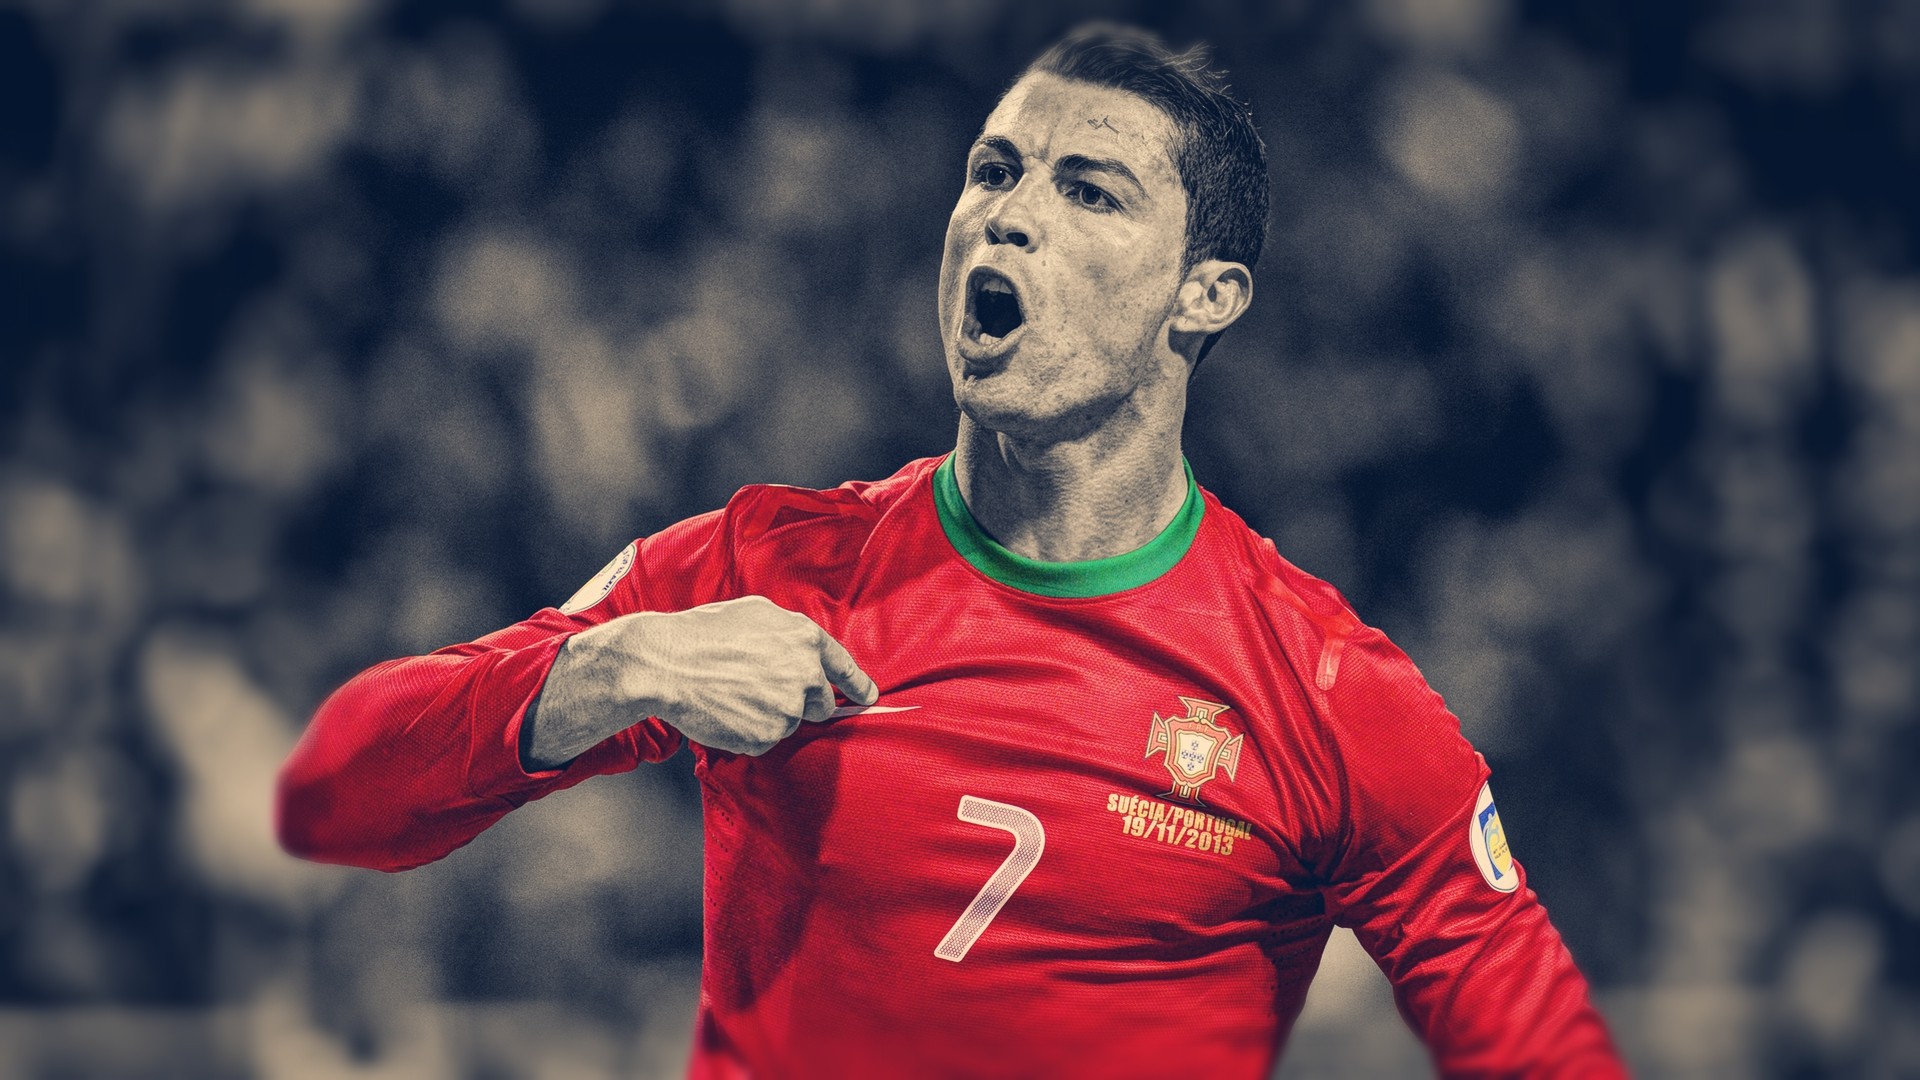 People 1920x1080 soccer HDR Cristiano Ronaldo sport numbers men